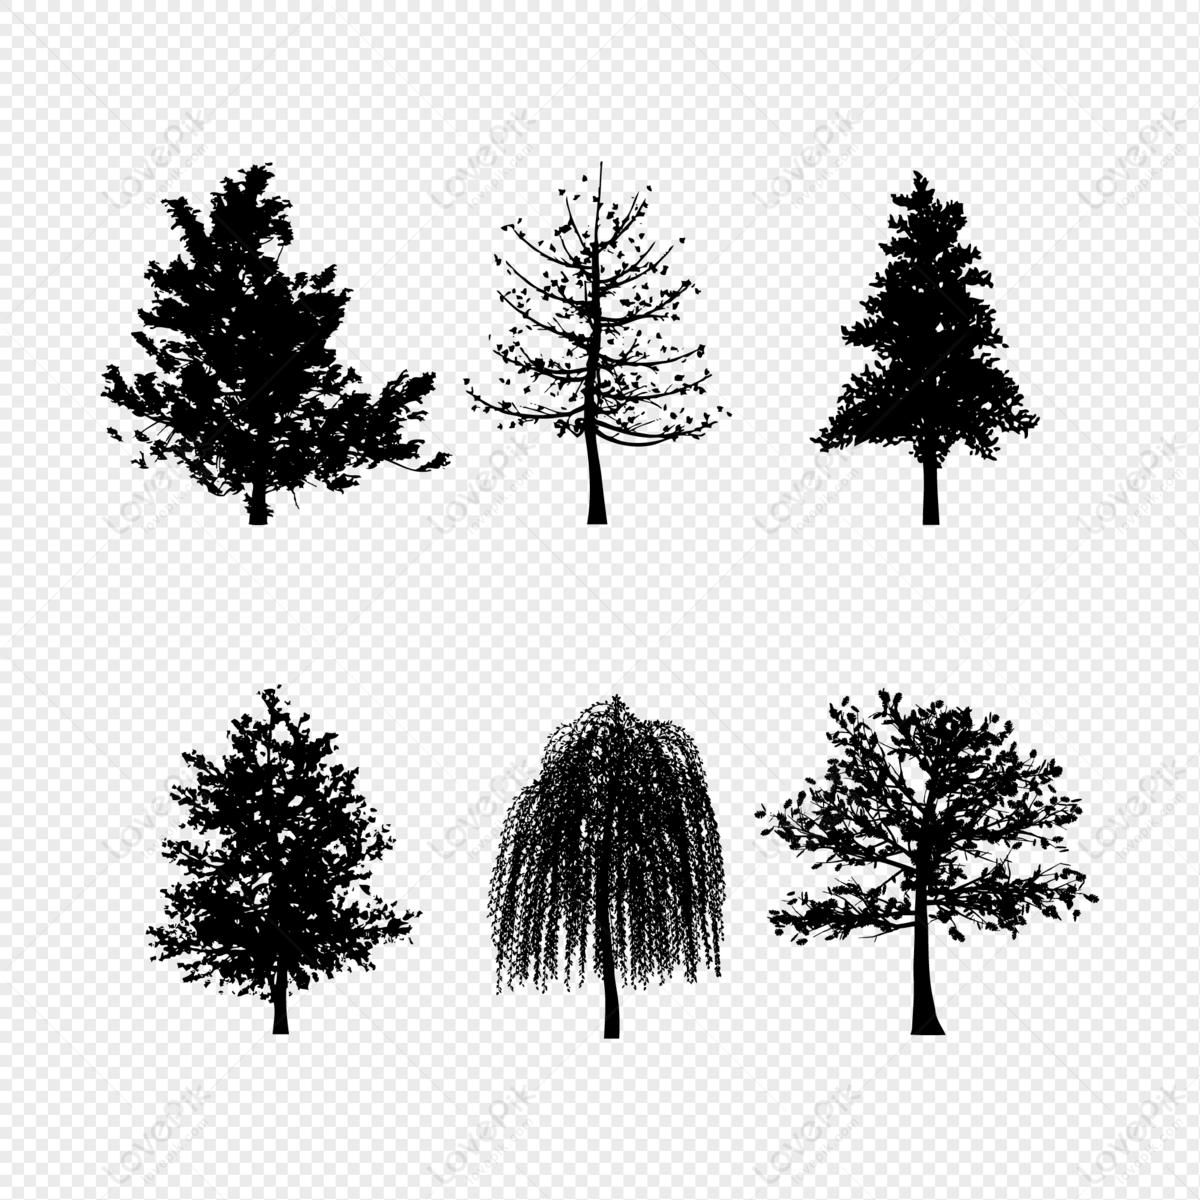 Tree silhouette vector, tree, vector silhouette, willow png image